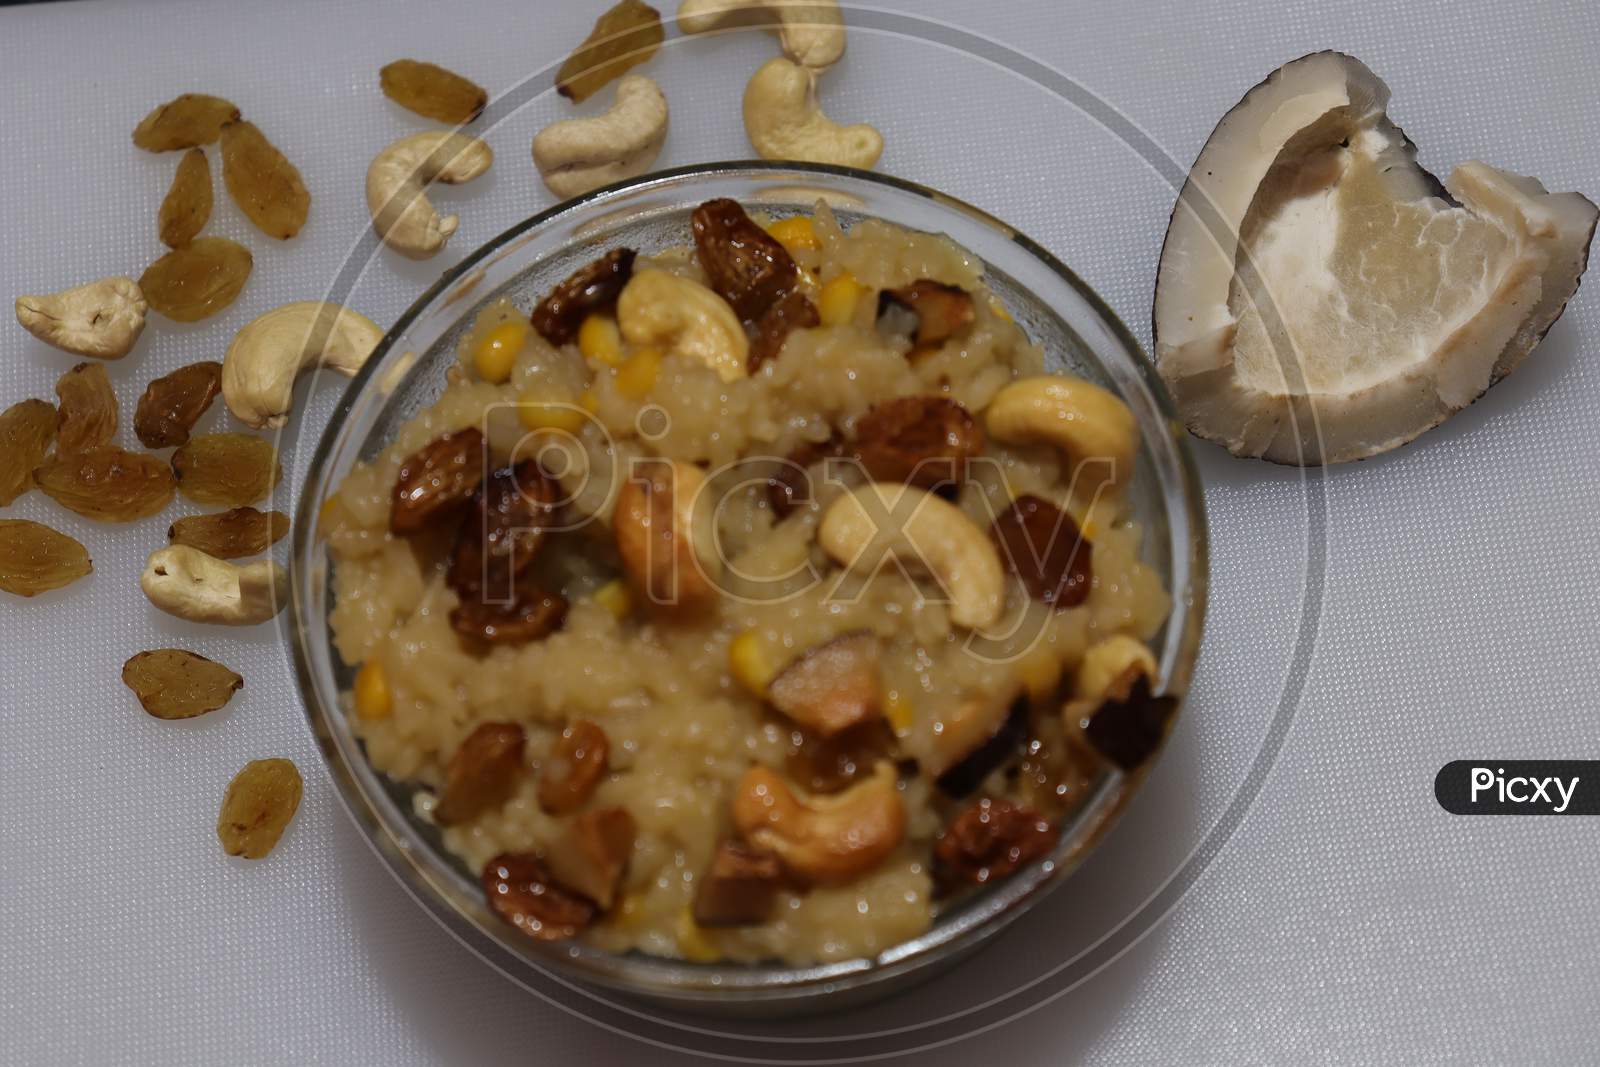 a traditional and popular sweet made on the festival day of Pongal or Sankranti.